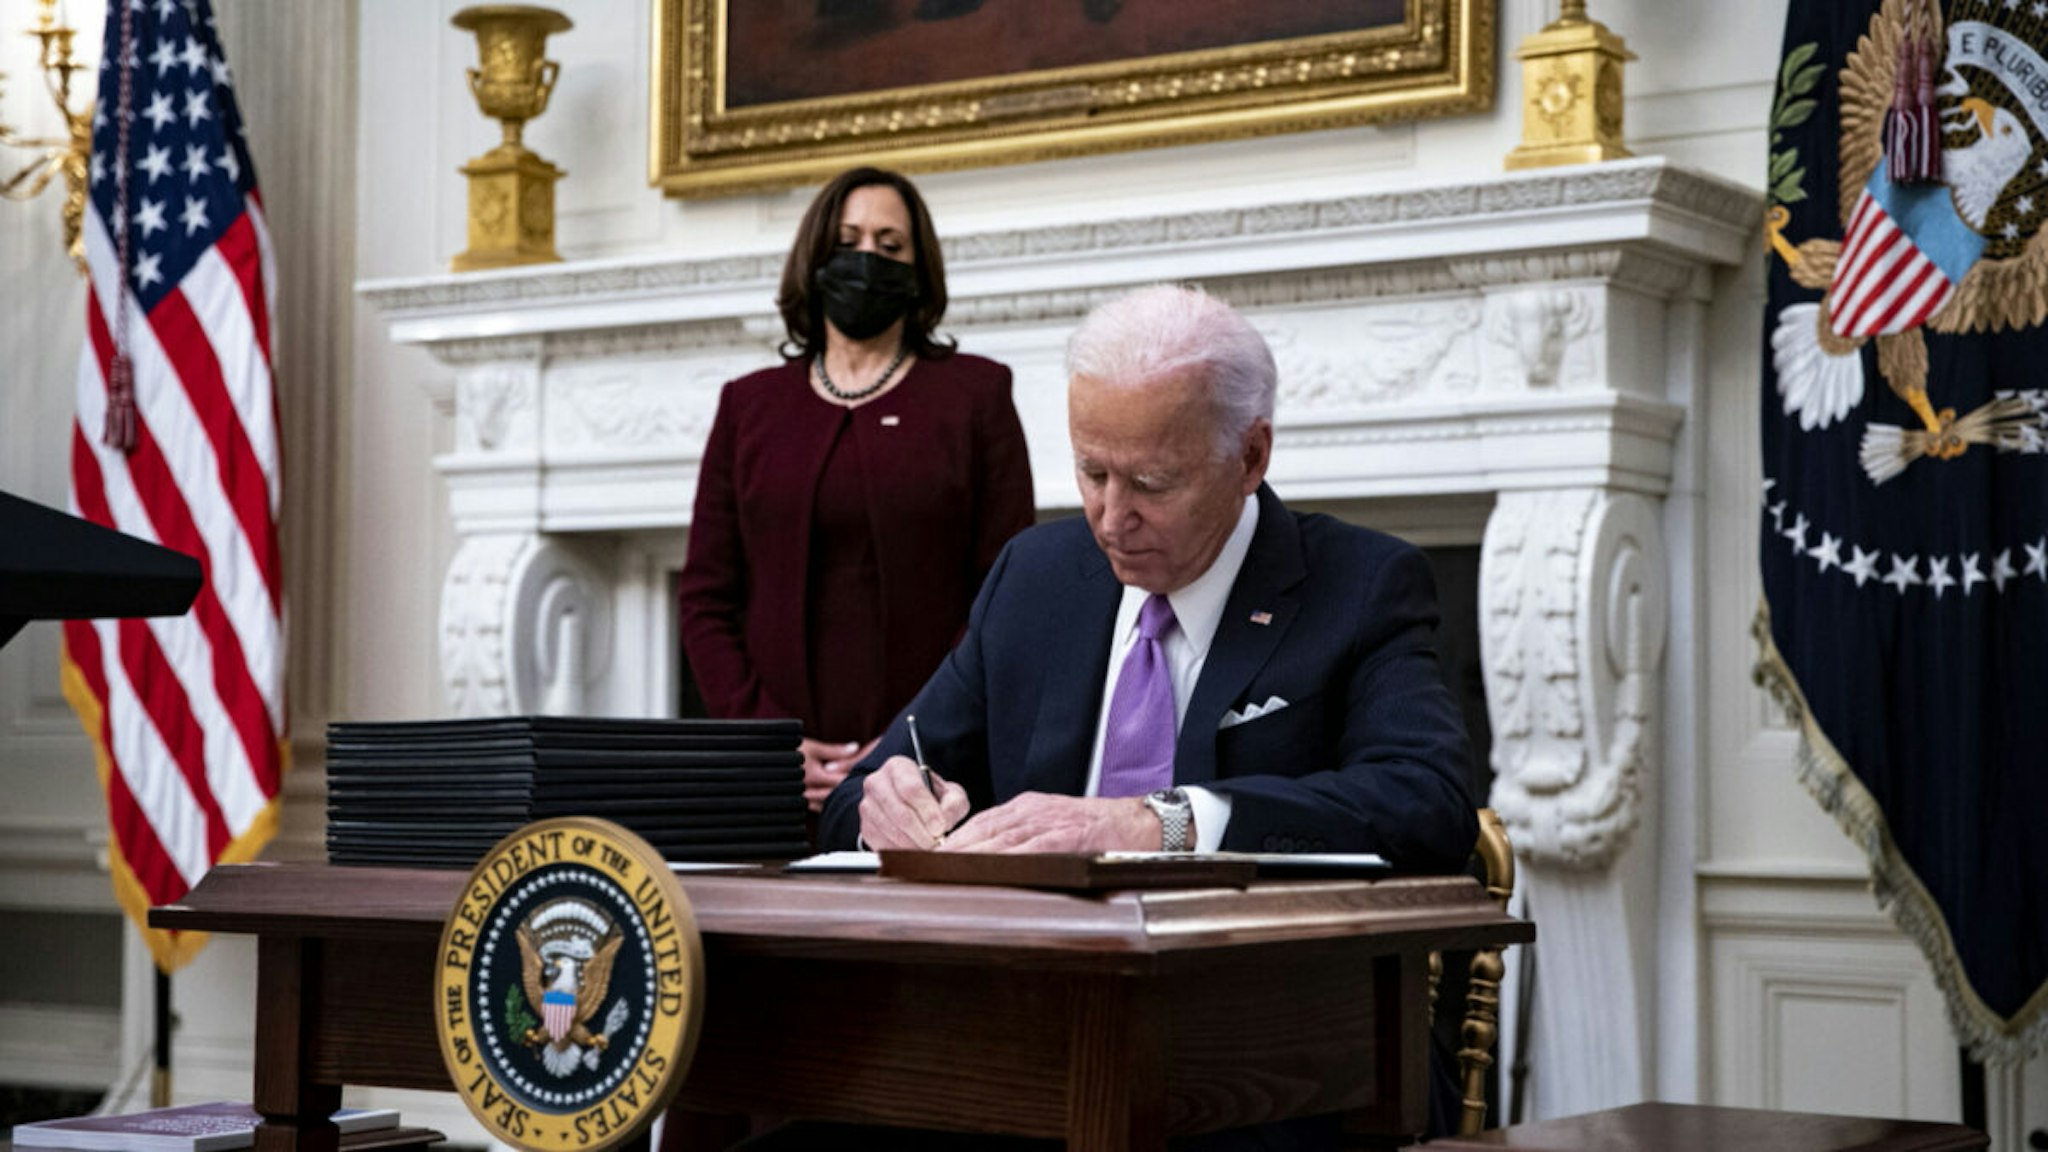 U.S. President Joe Biden signs an executive order after speaking during an event on his administration's Covid-19 response with U.S. Vice President Kamala Harris, left, in the State Dining Room of the White House in Washington, D.C., U.S., on Thursday, Jan. 21, 2021.